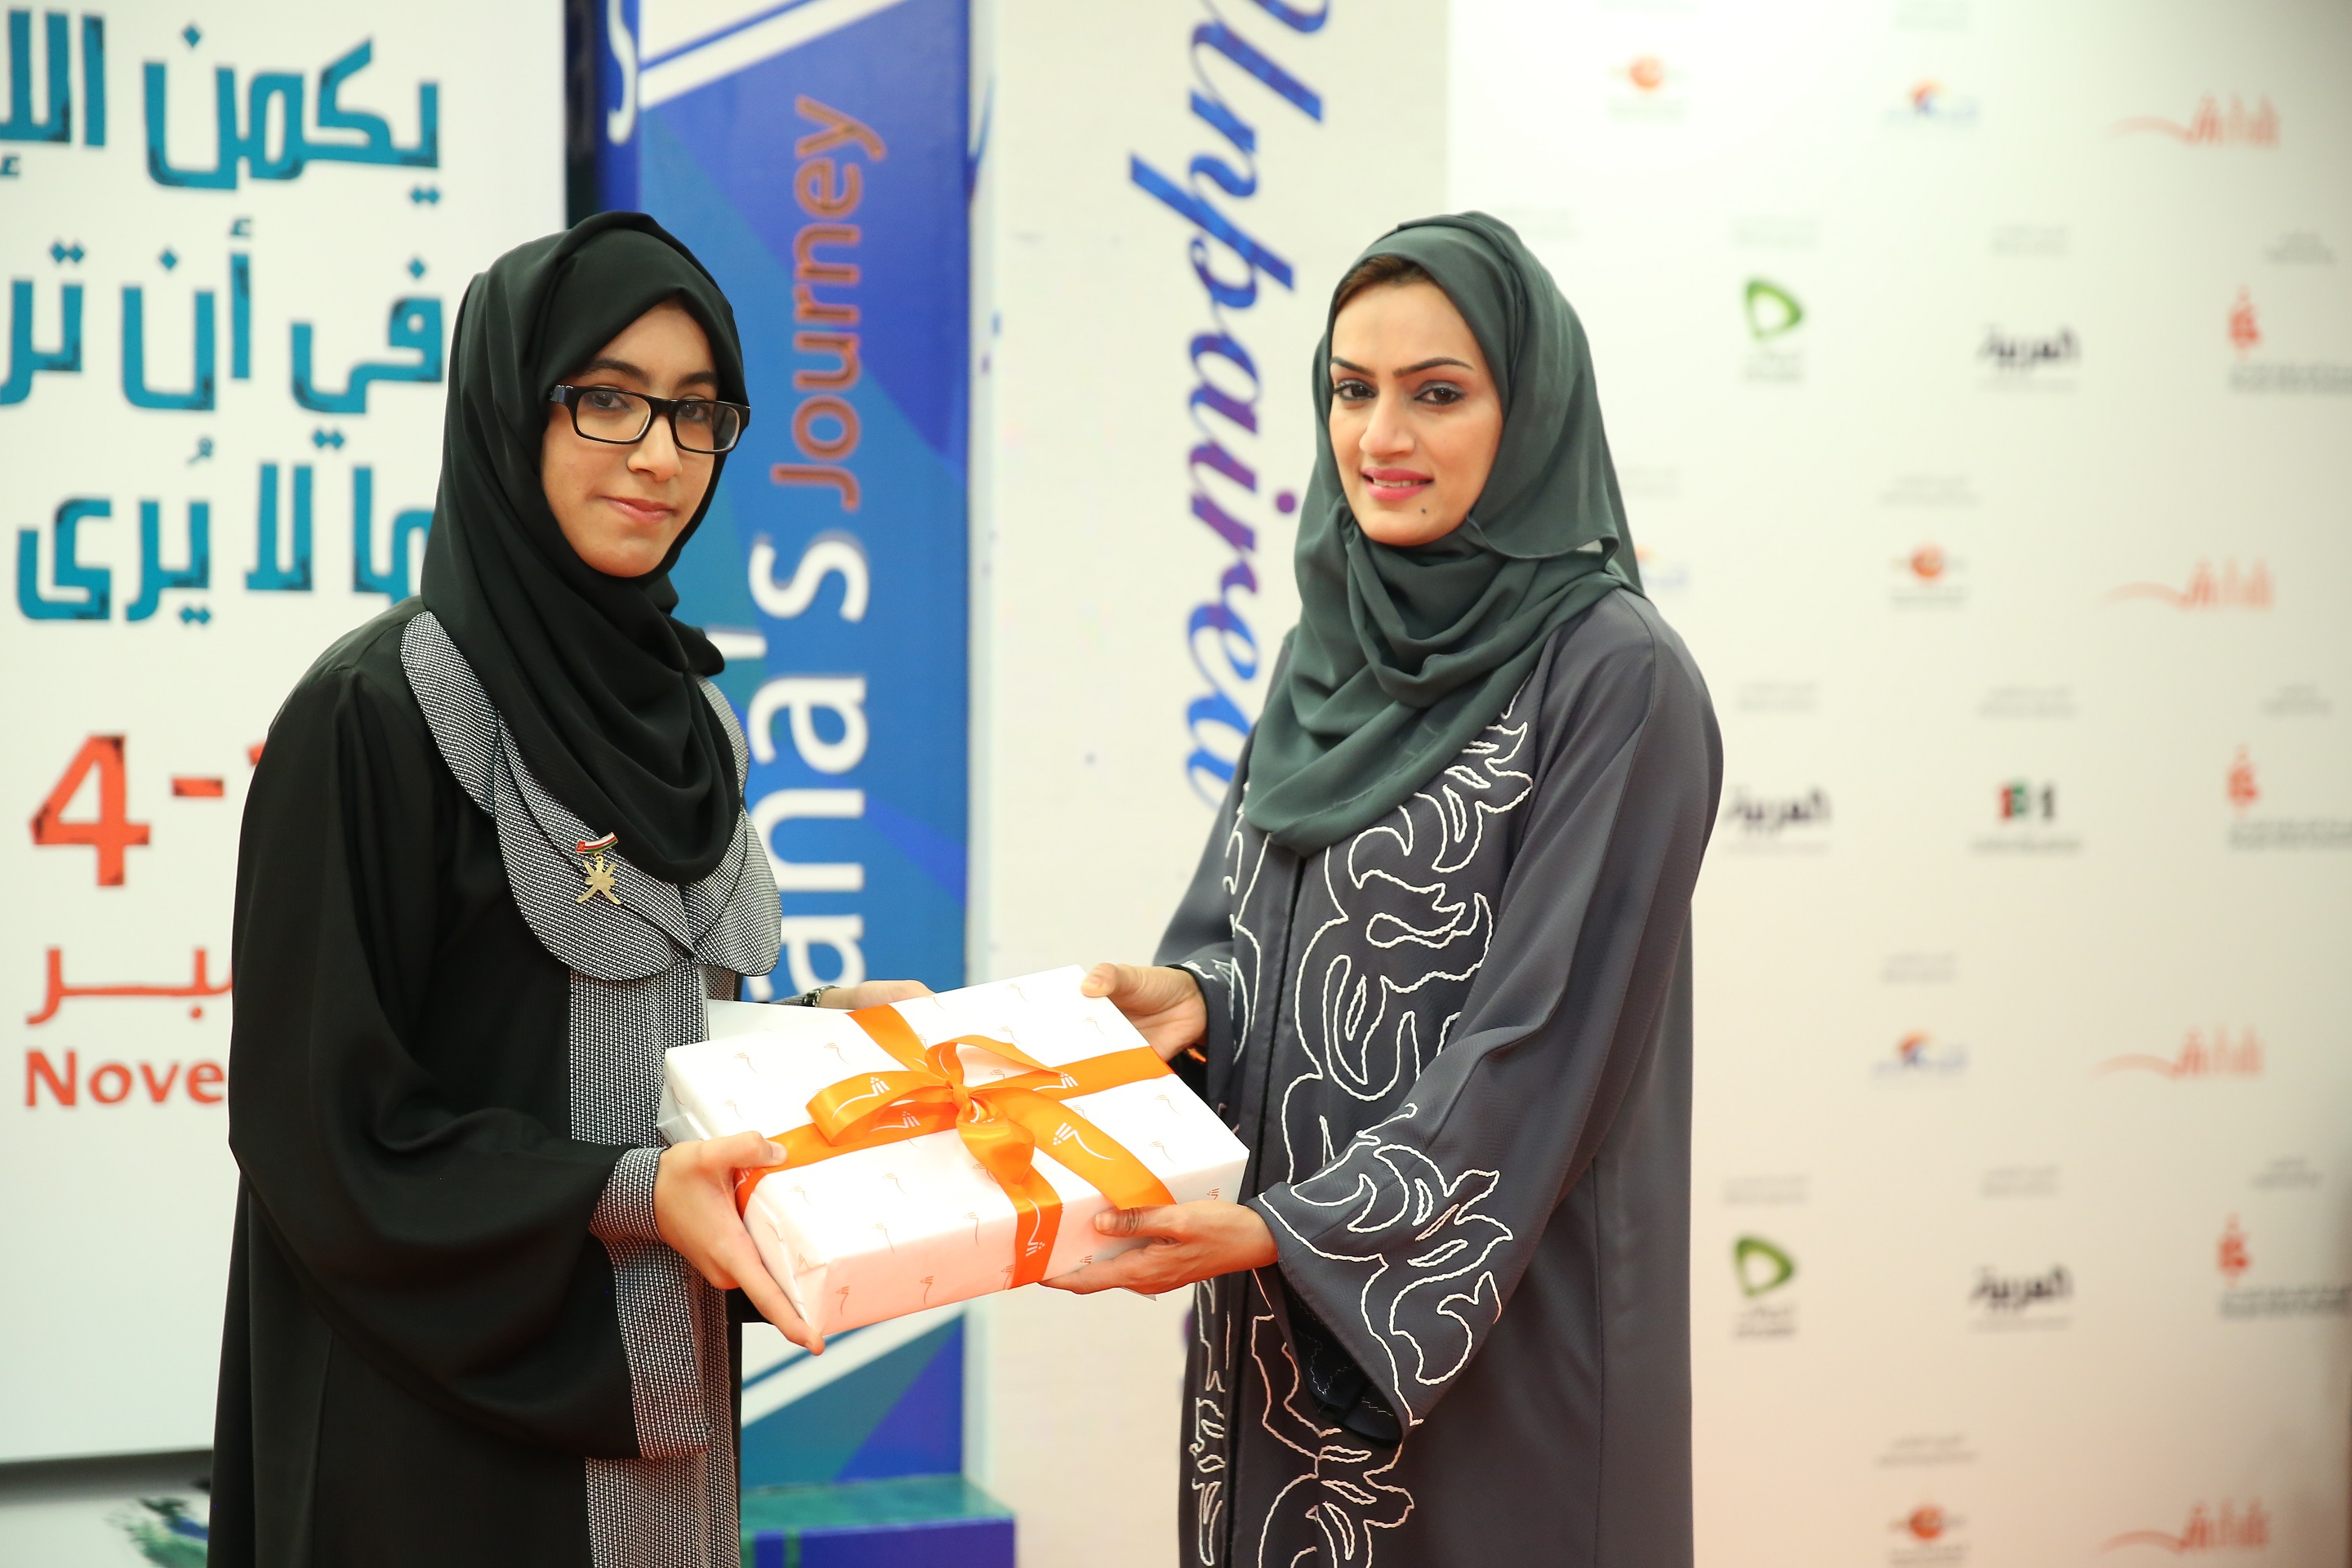 UAE students win best press report award for SIBF coverage